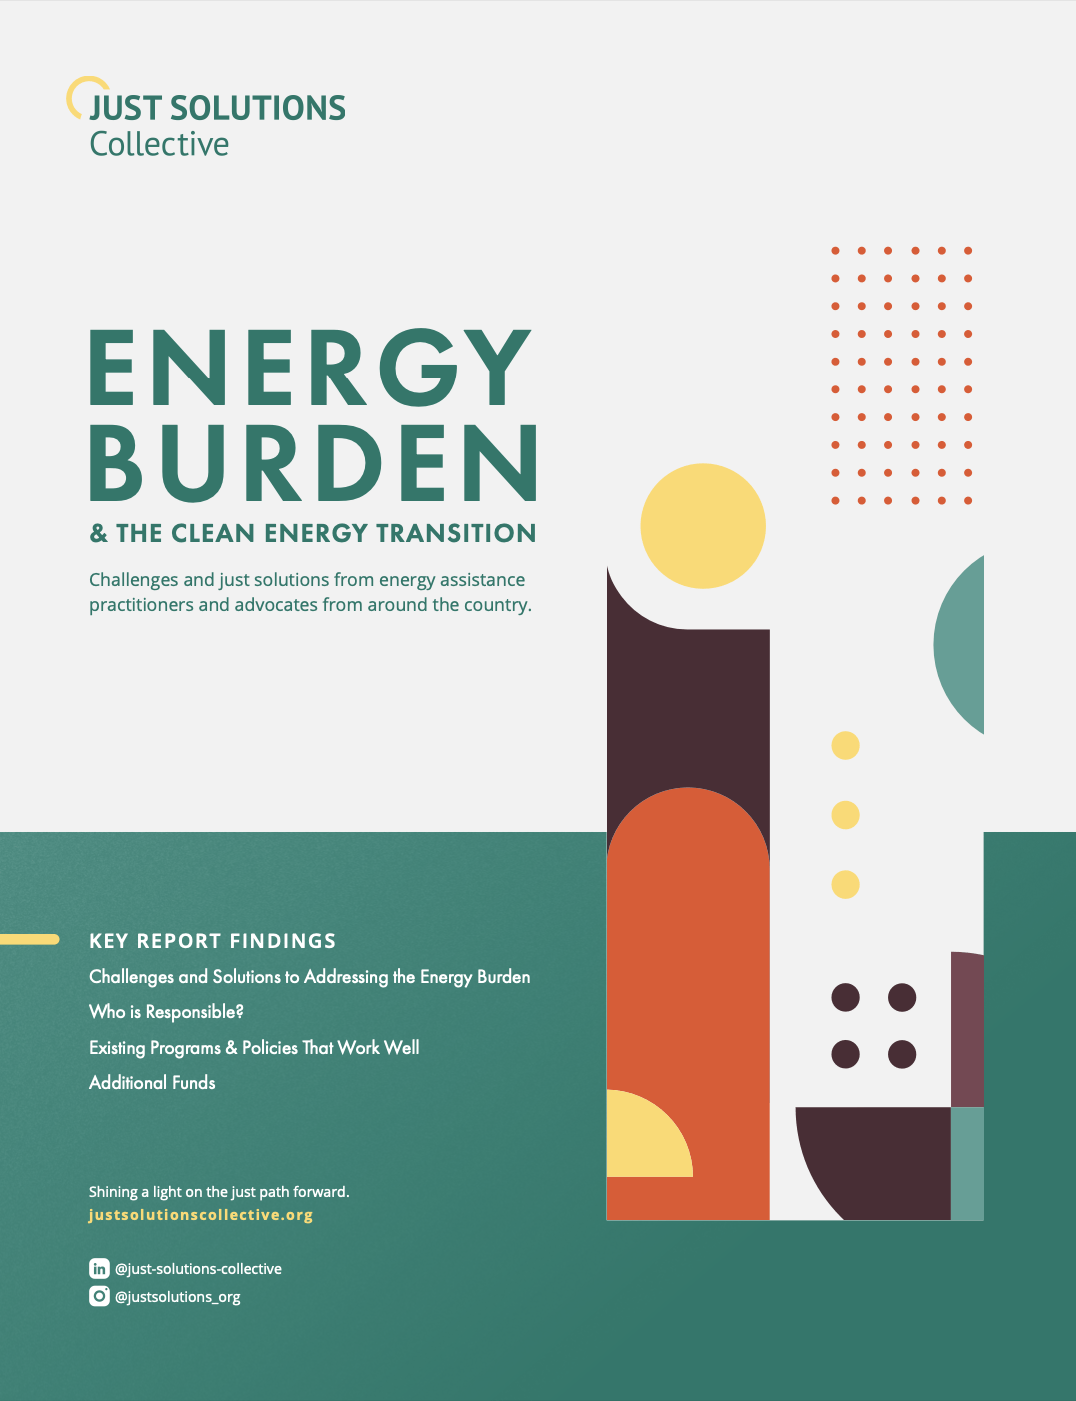 Challenges and Solutions to Addressing the Energy Burden | Blog Series Part 2/3